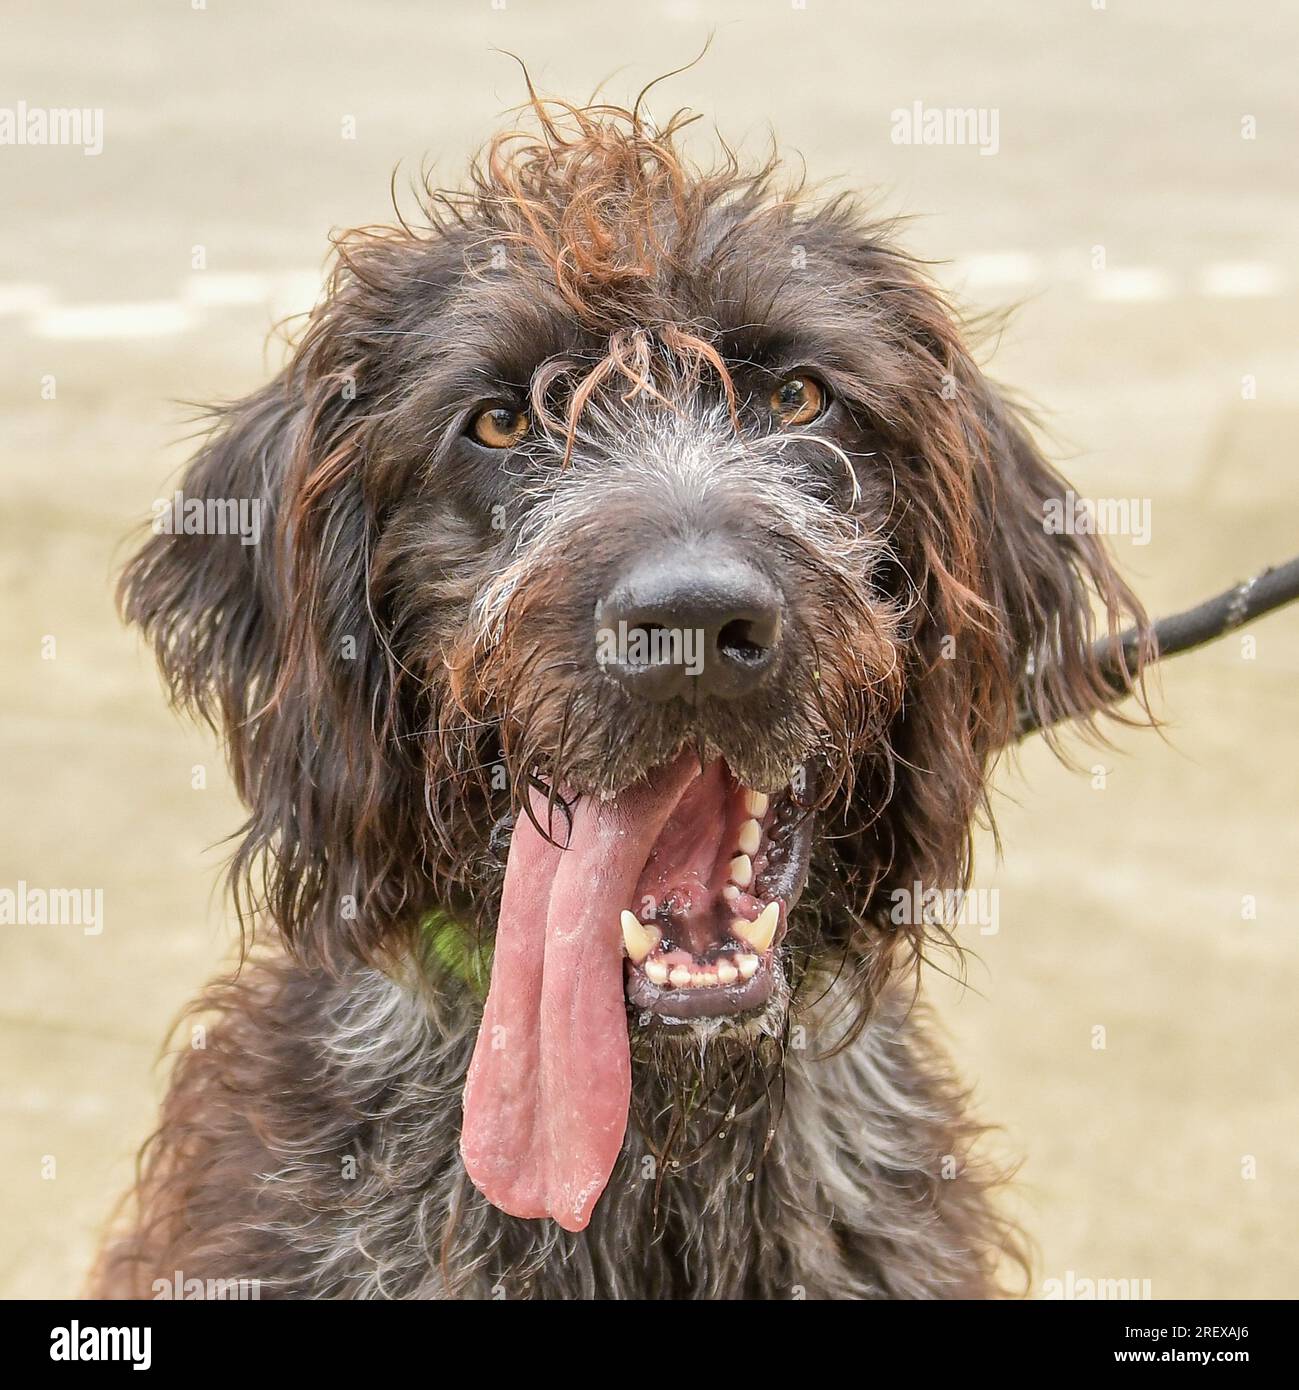 German wire haired pointer Stock Photo